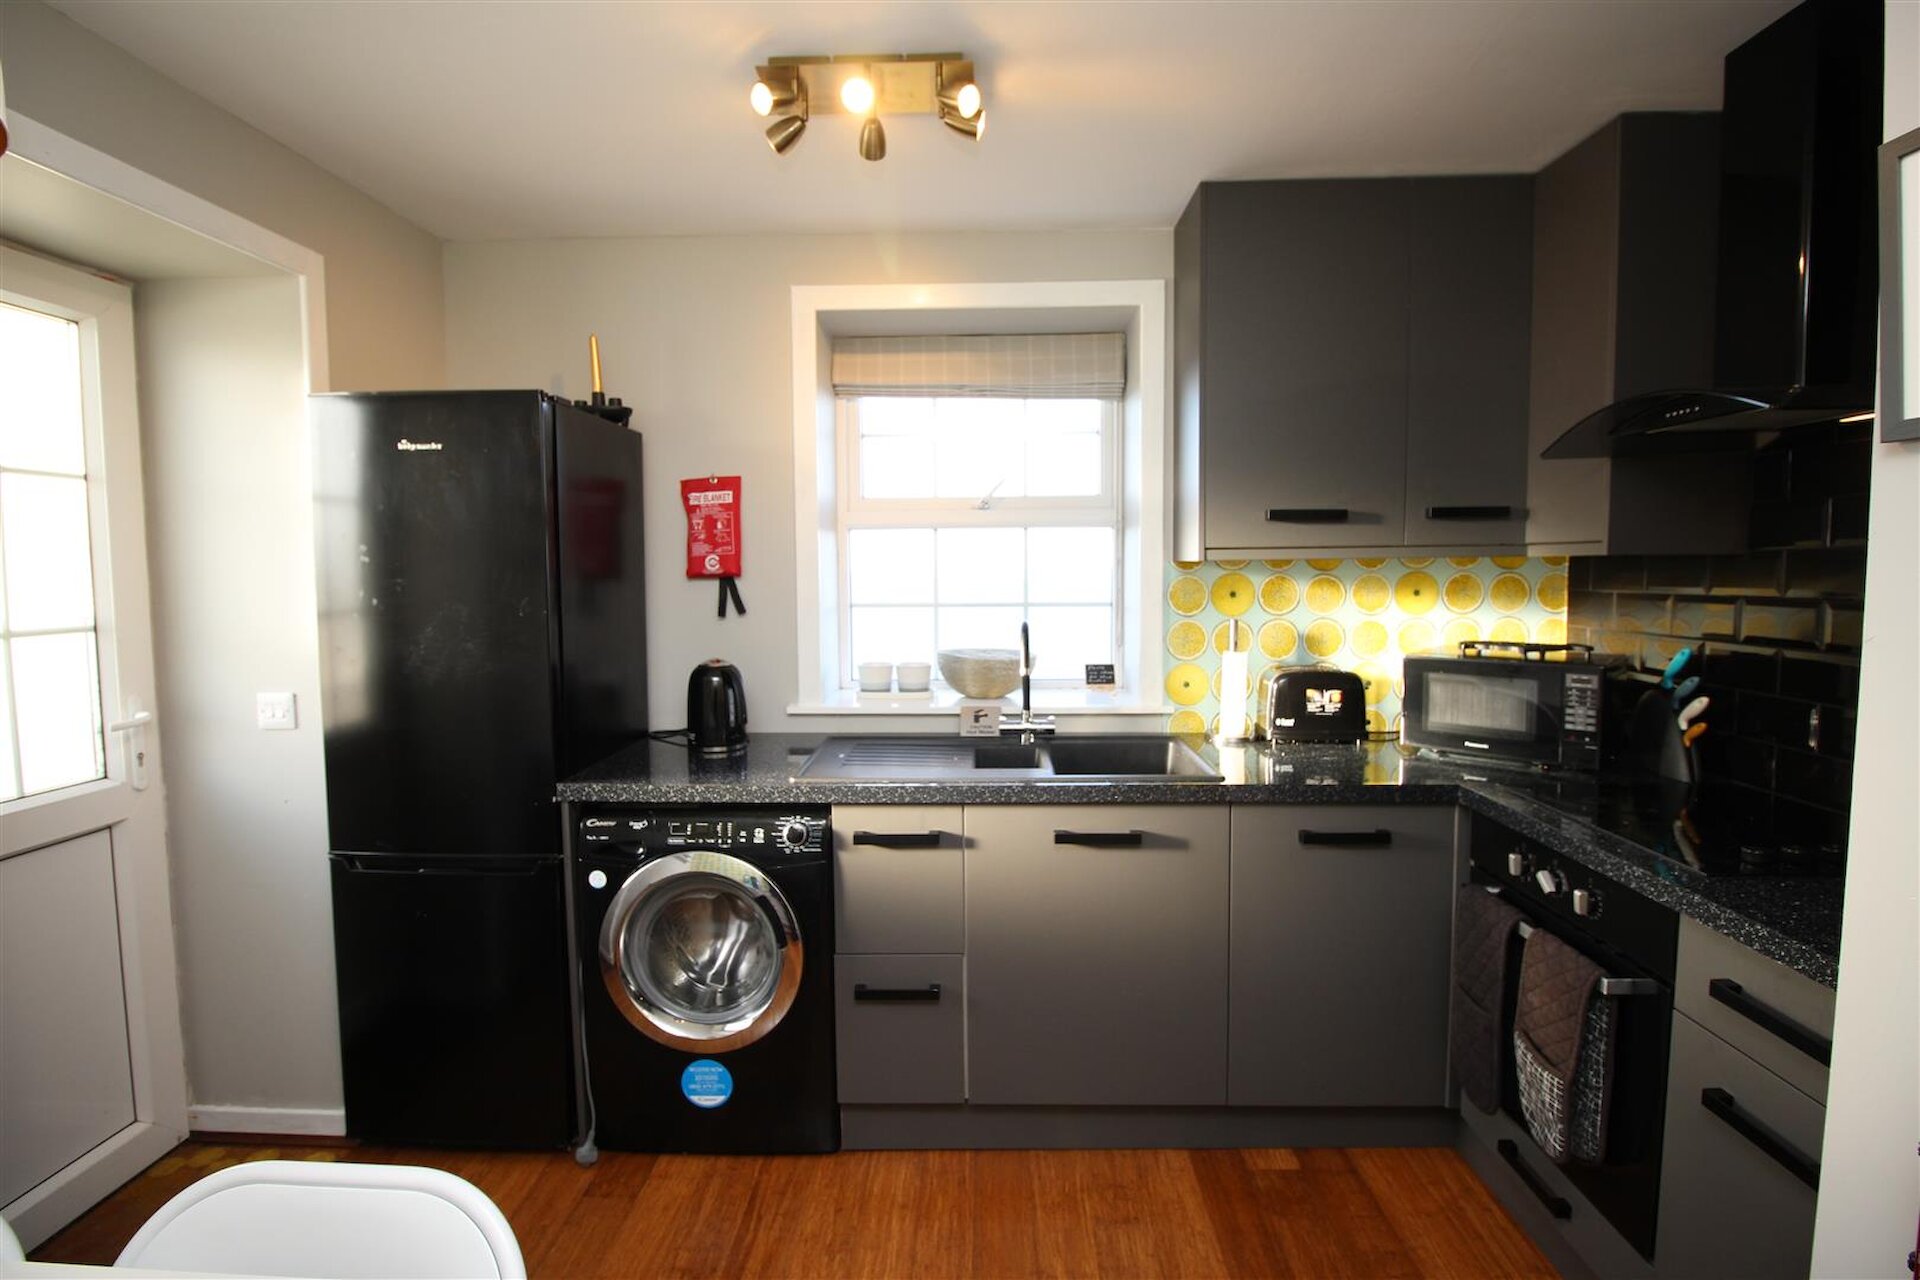 The three-bedroom home also has a recently upgraded modern kitchen.